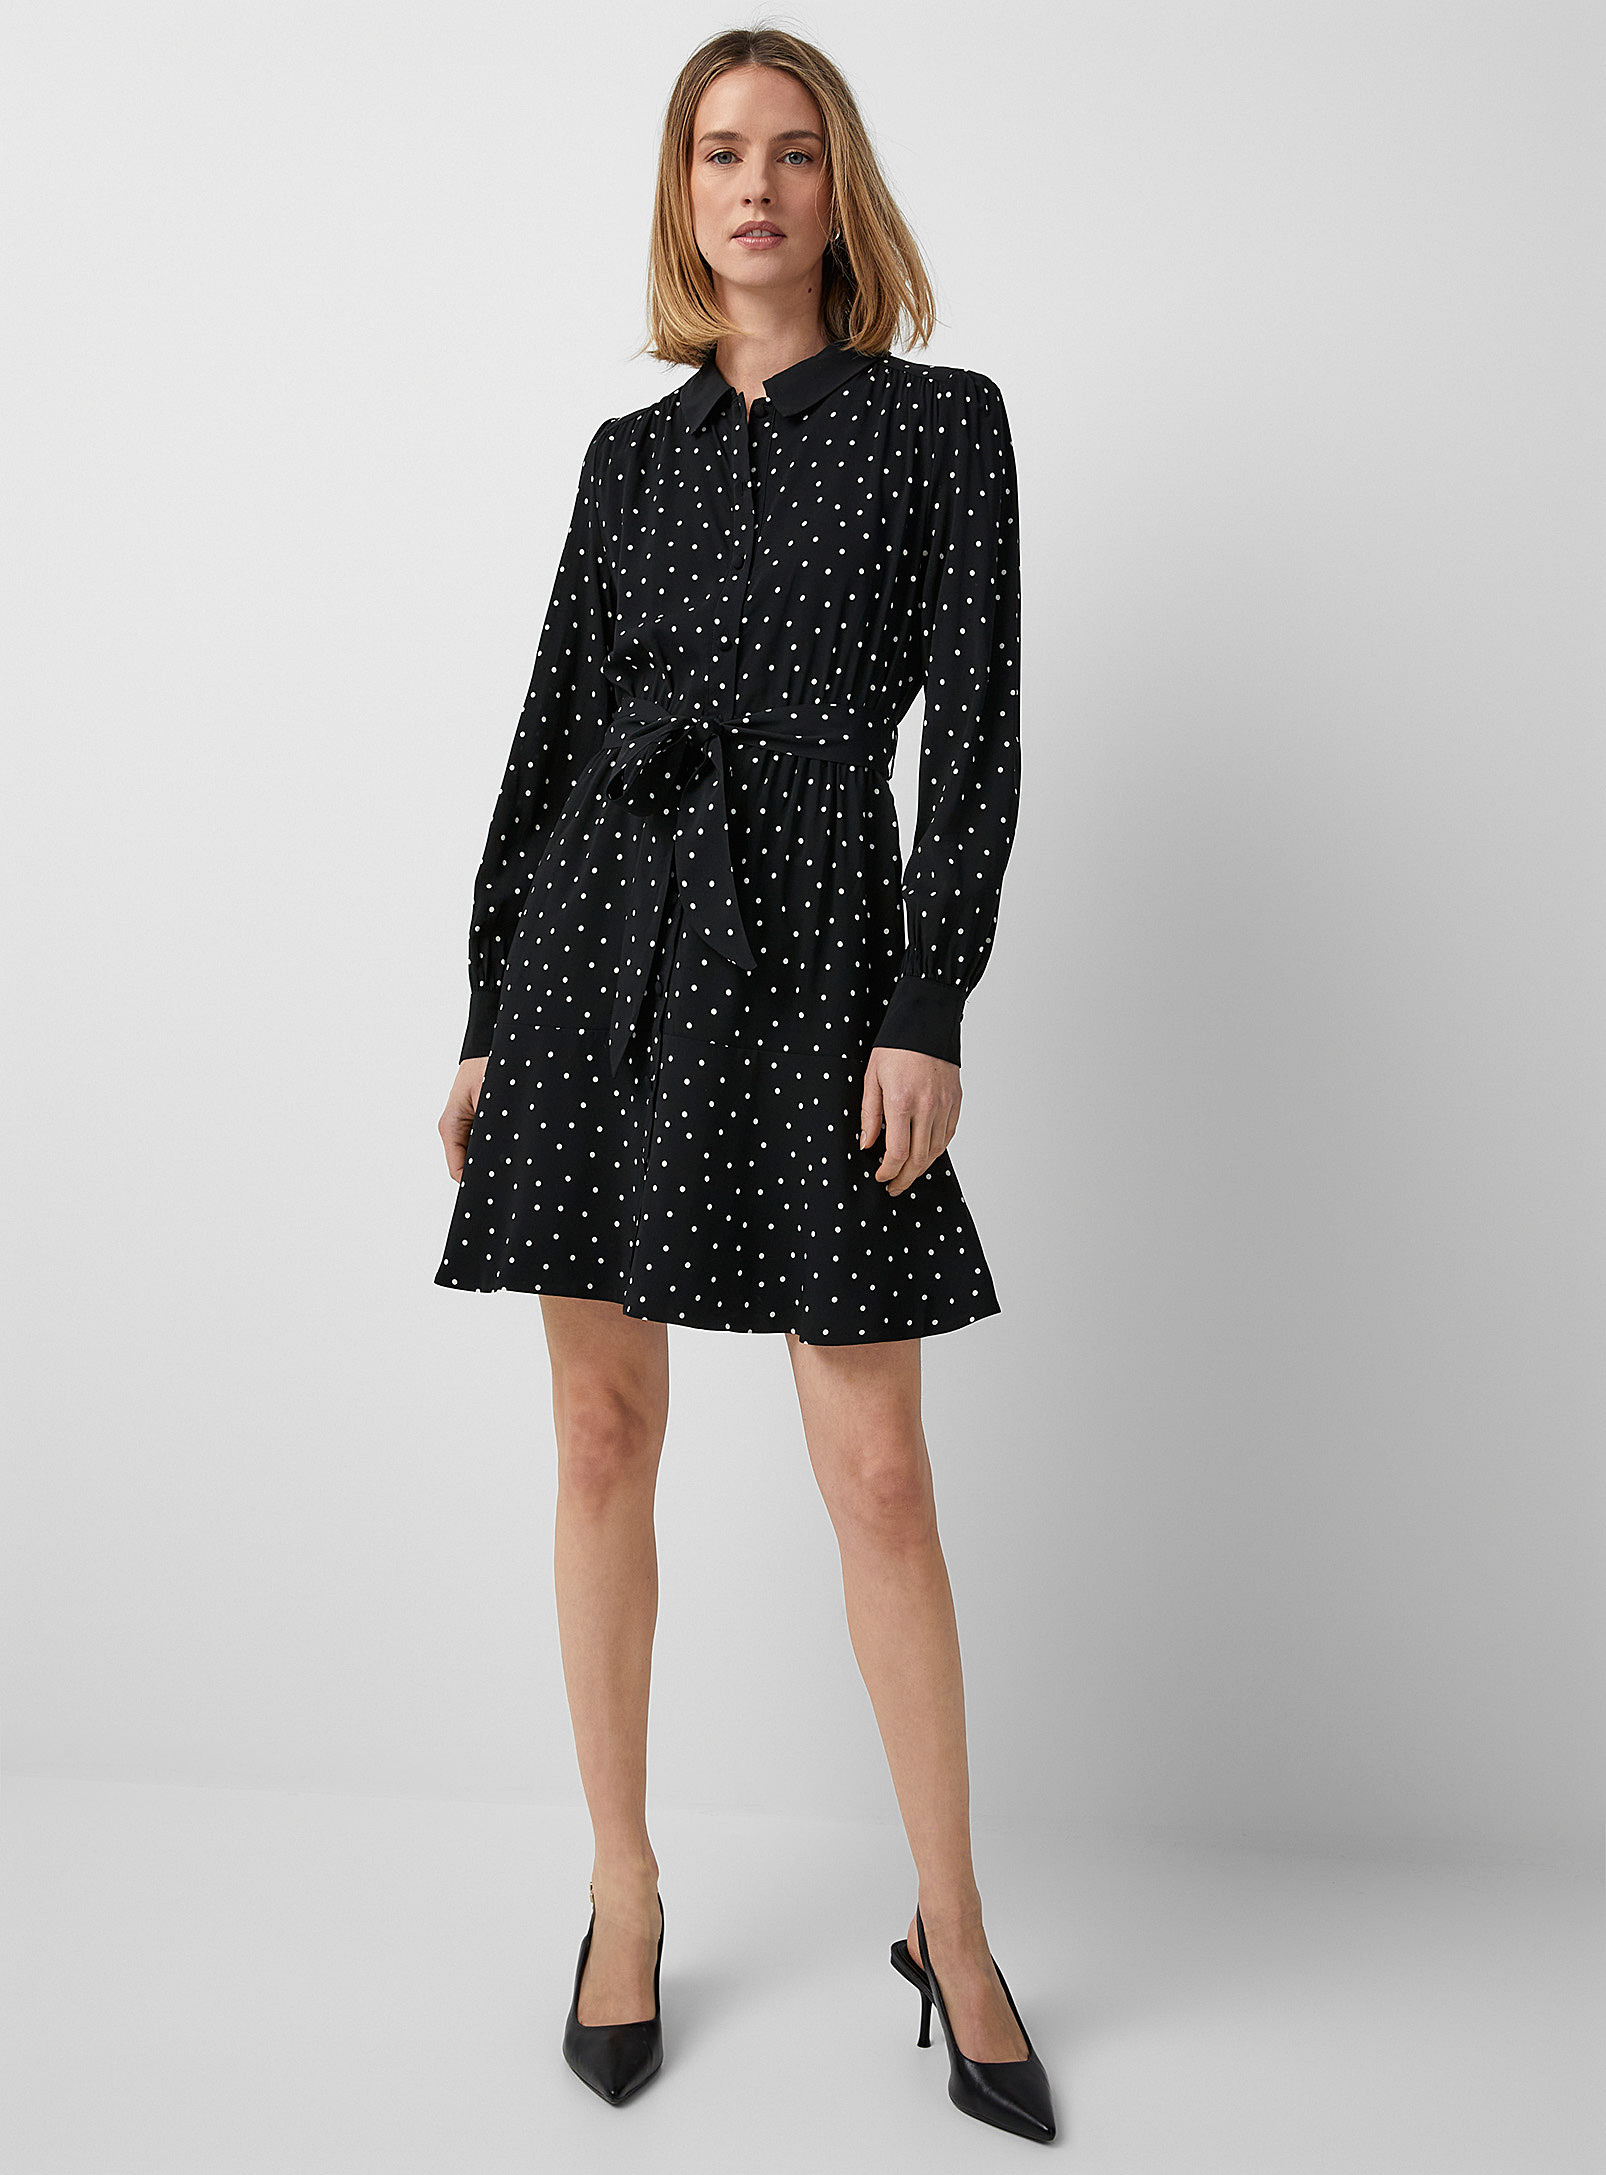 Contemporaine Polka Dot Belted Flowy Dress In Black And White